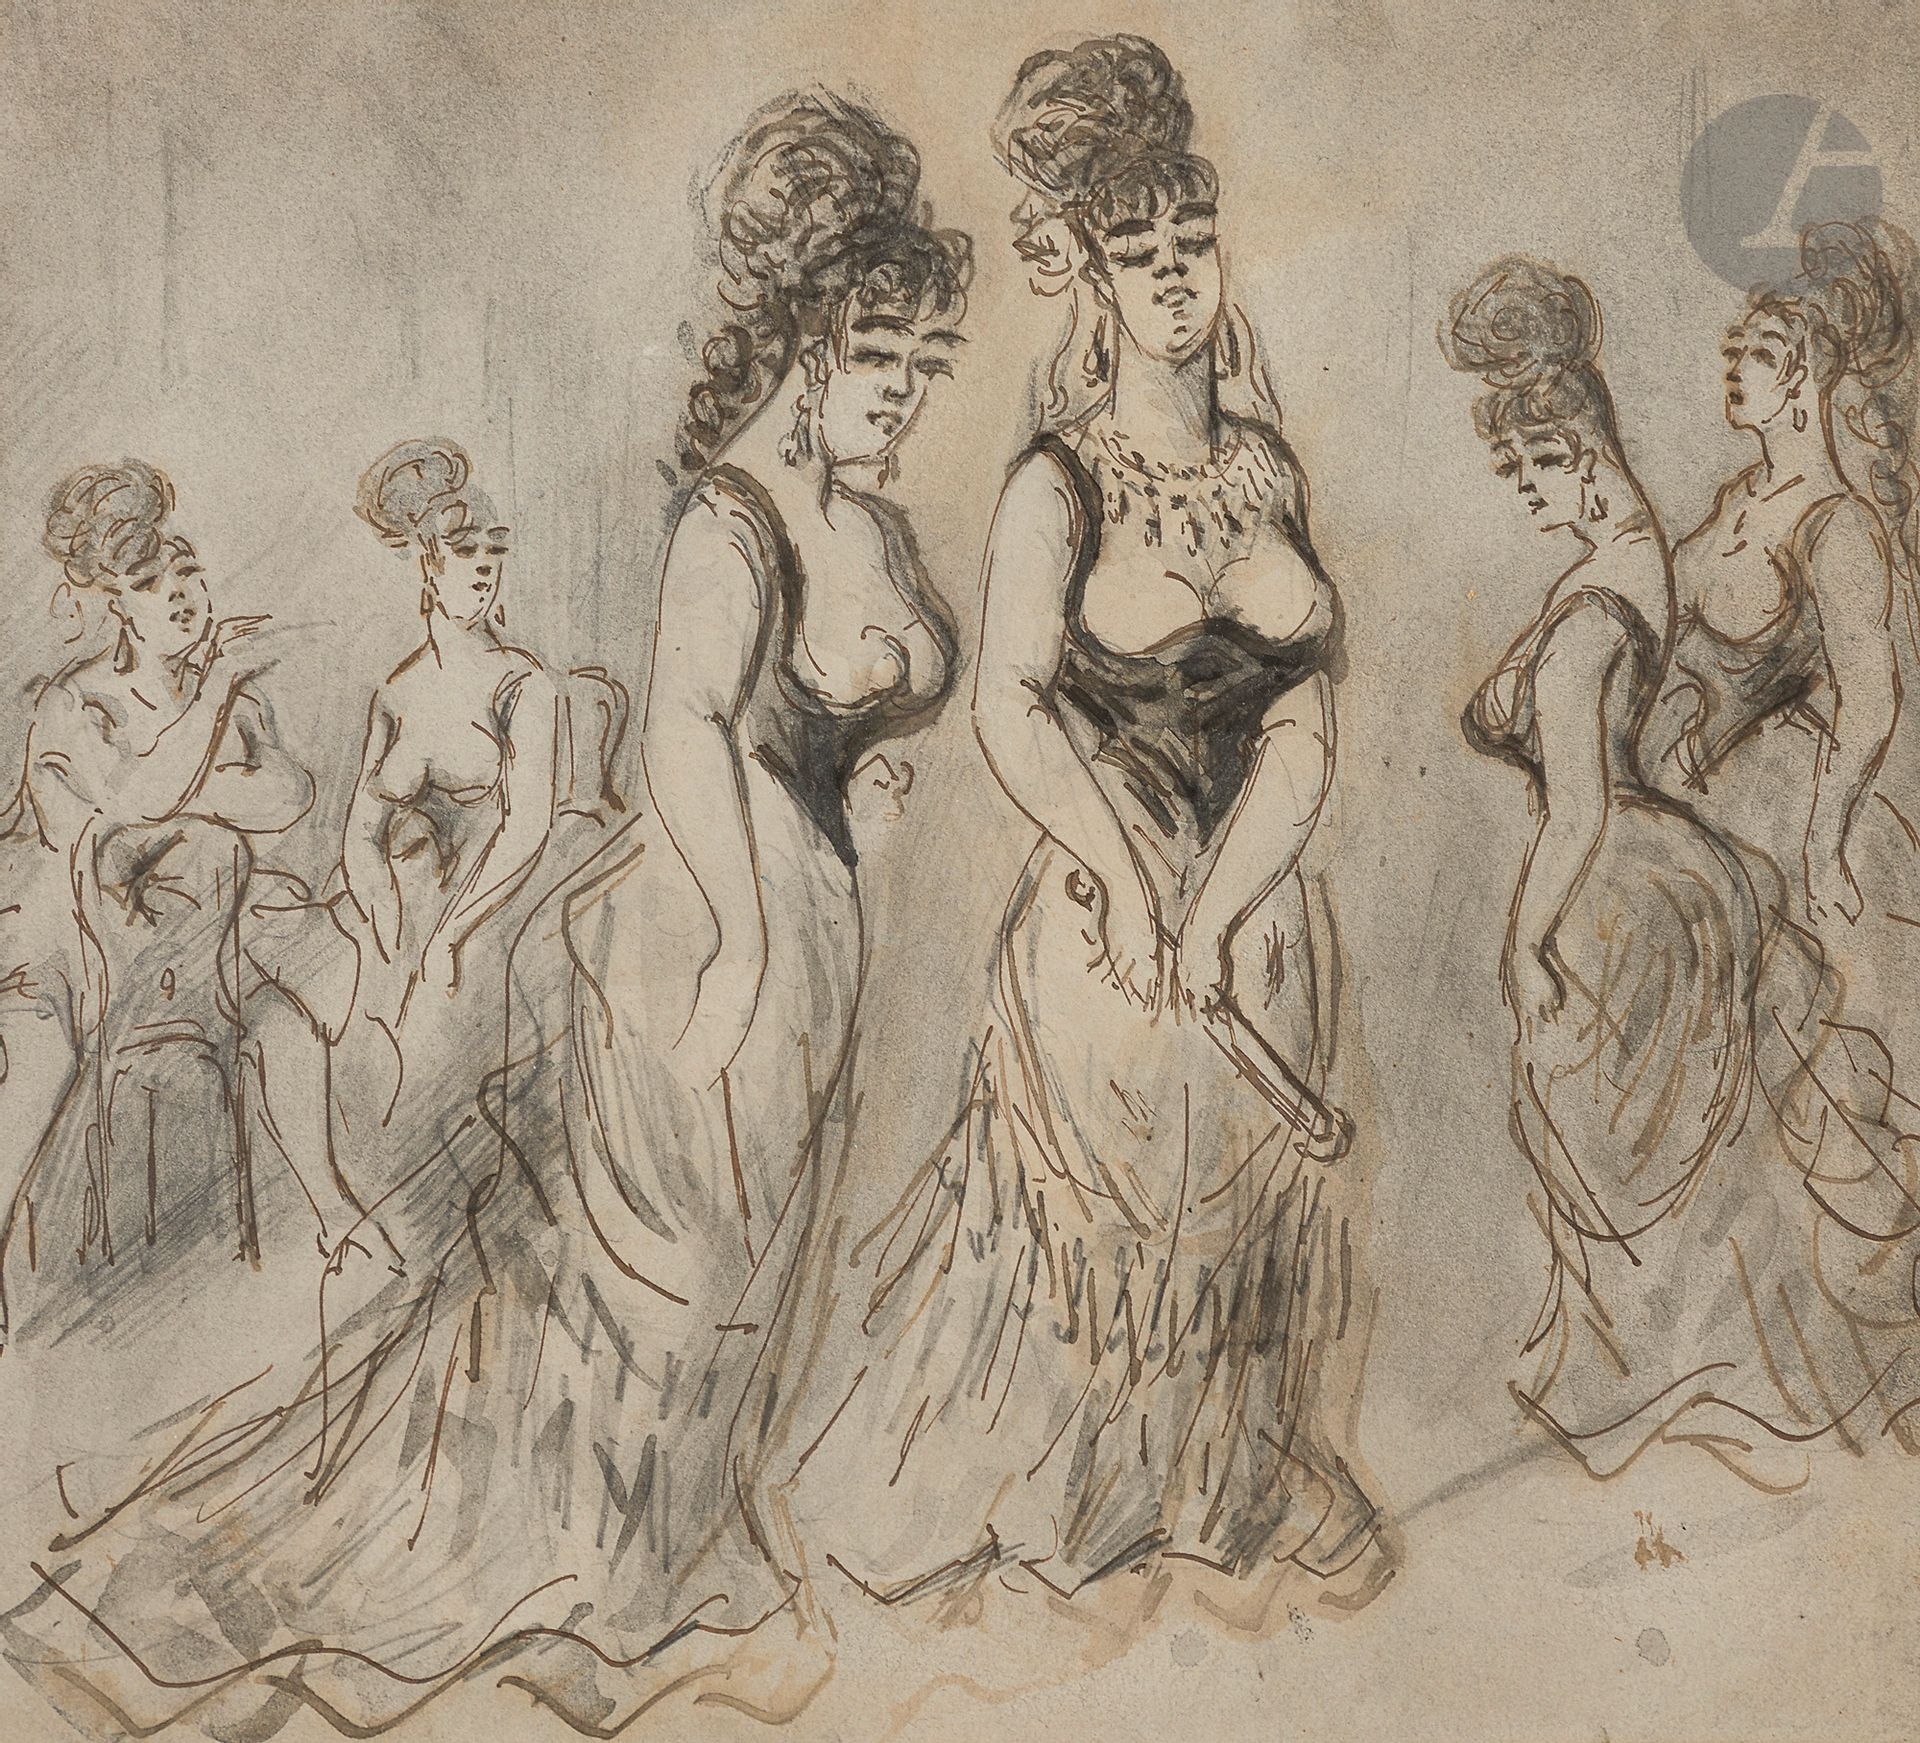 Artwork by Constantin Guys, Femmes au bordel, Made of Pen, brown ink over black pencil lines and gray wash